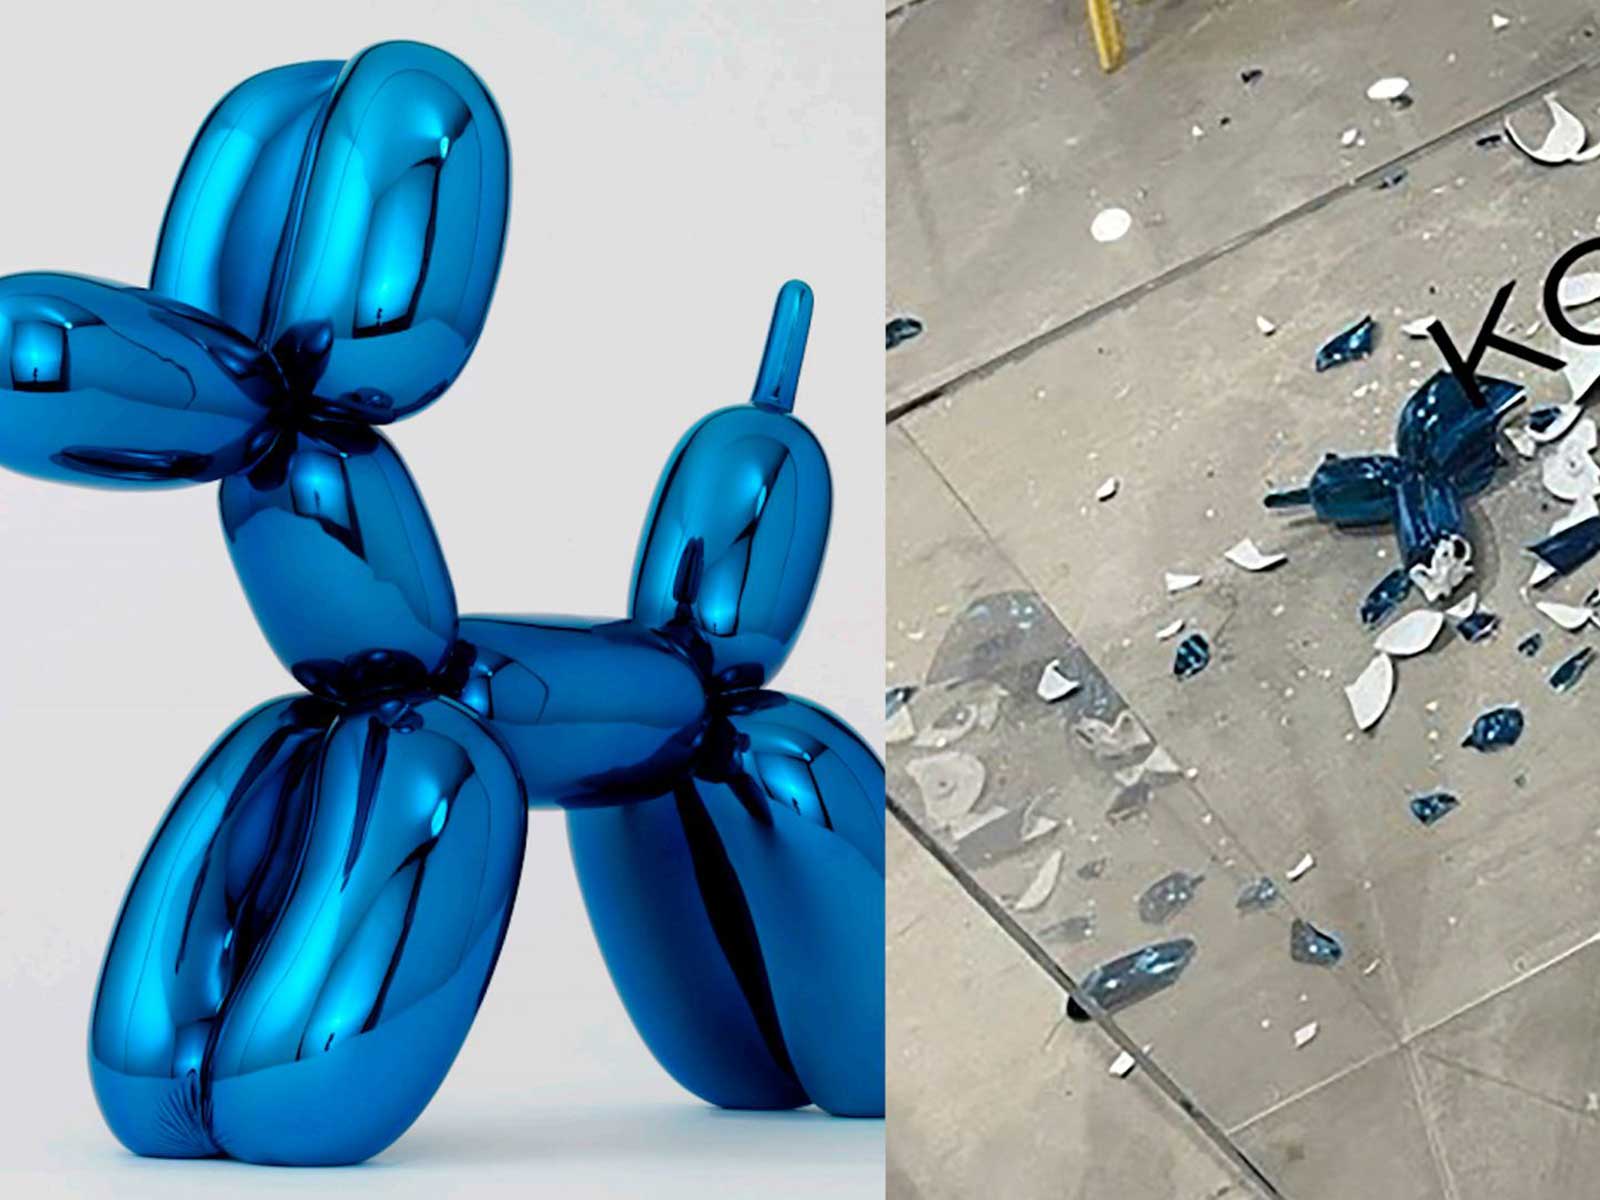 A visitor accidentally breaks one of Jeff Koons’ famous Balloon Dogs